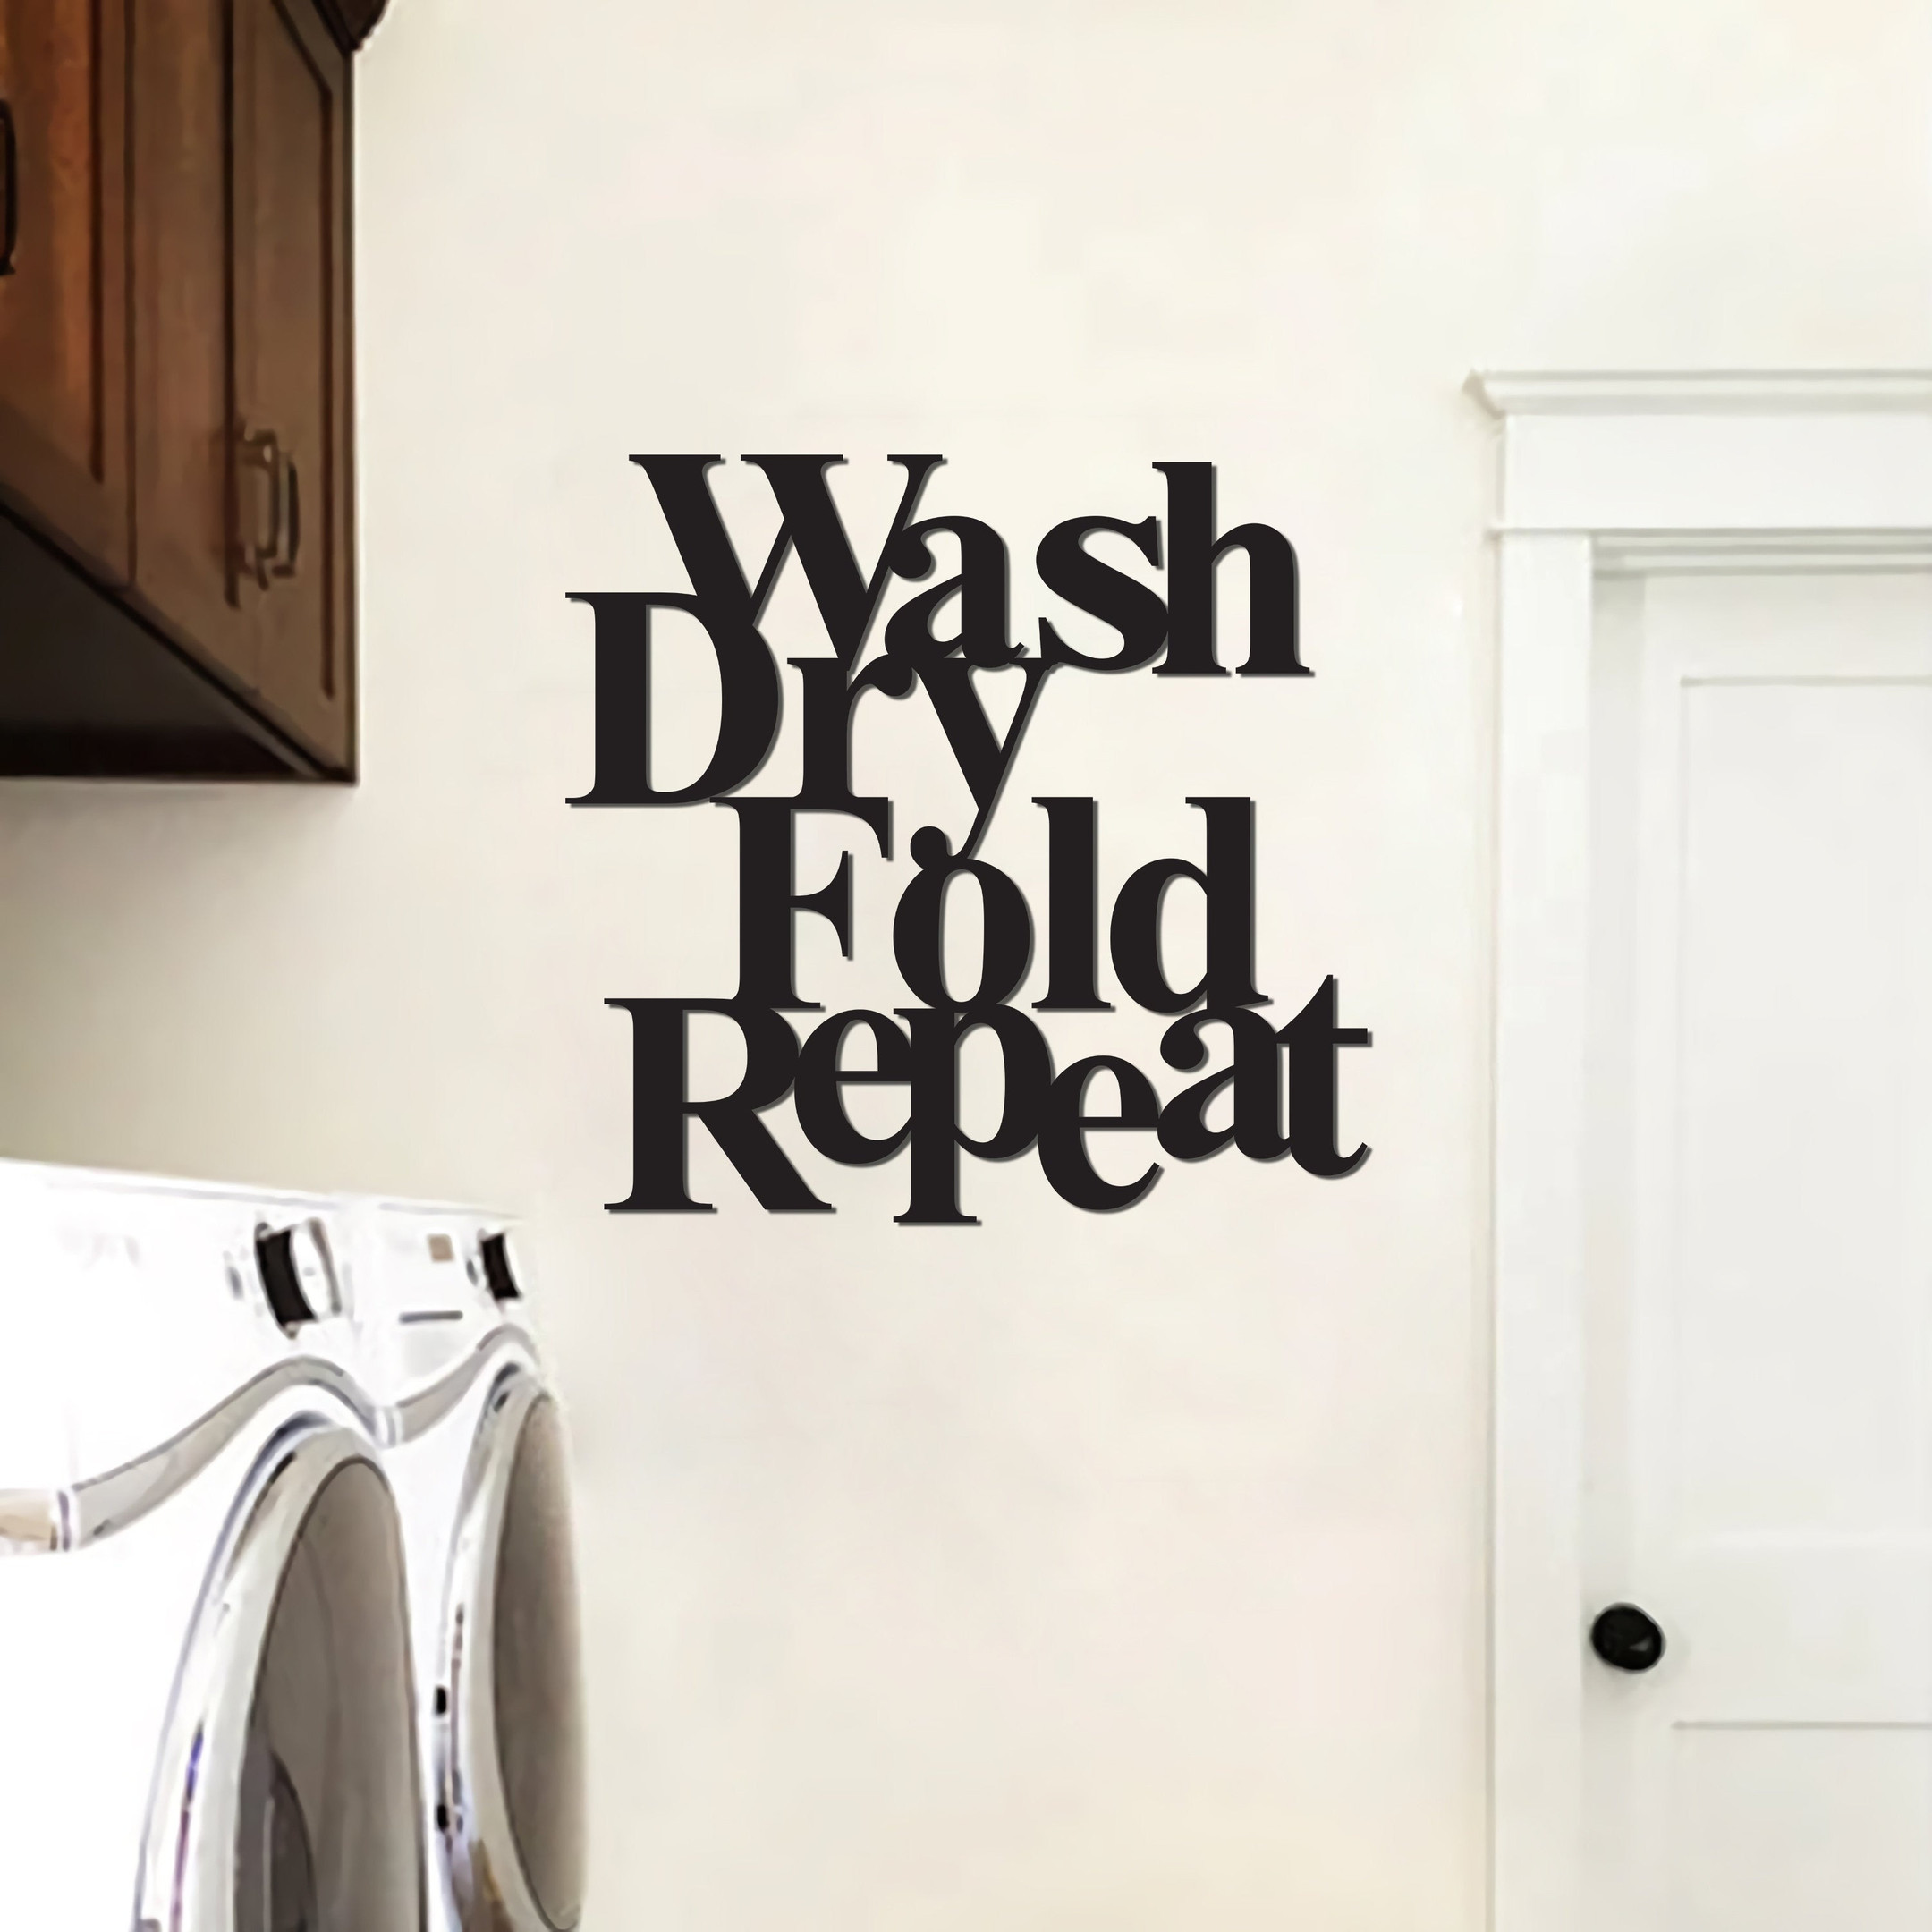 Wash Dry Fold Repeat Sign, Personalized Laundry Room Metal Sign, Laundry Phrase Sign, Wash Dry Fold Repeat Wall Hanging, Best Gift Ever, Laser Cut Metal Signs Custom Gift Ideas 12x12IN